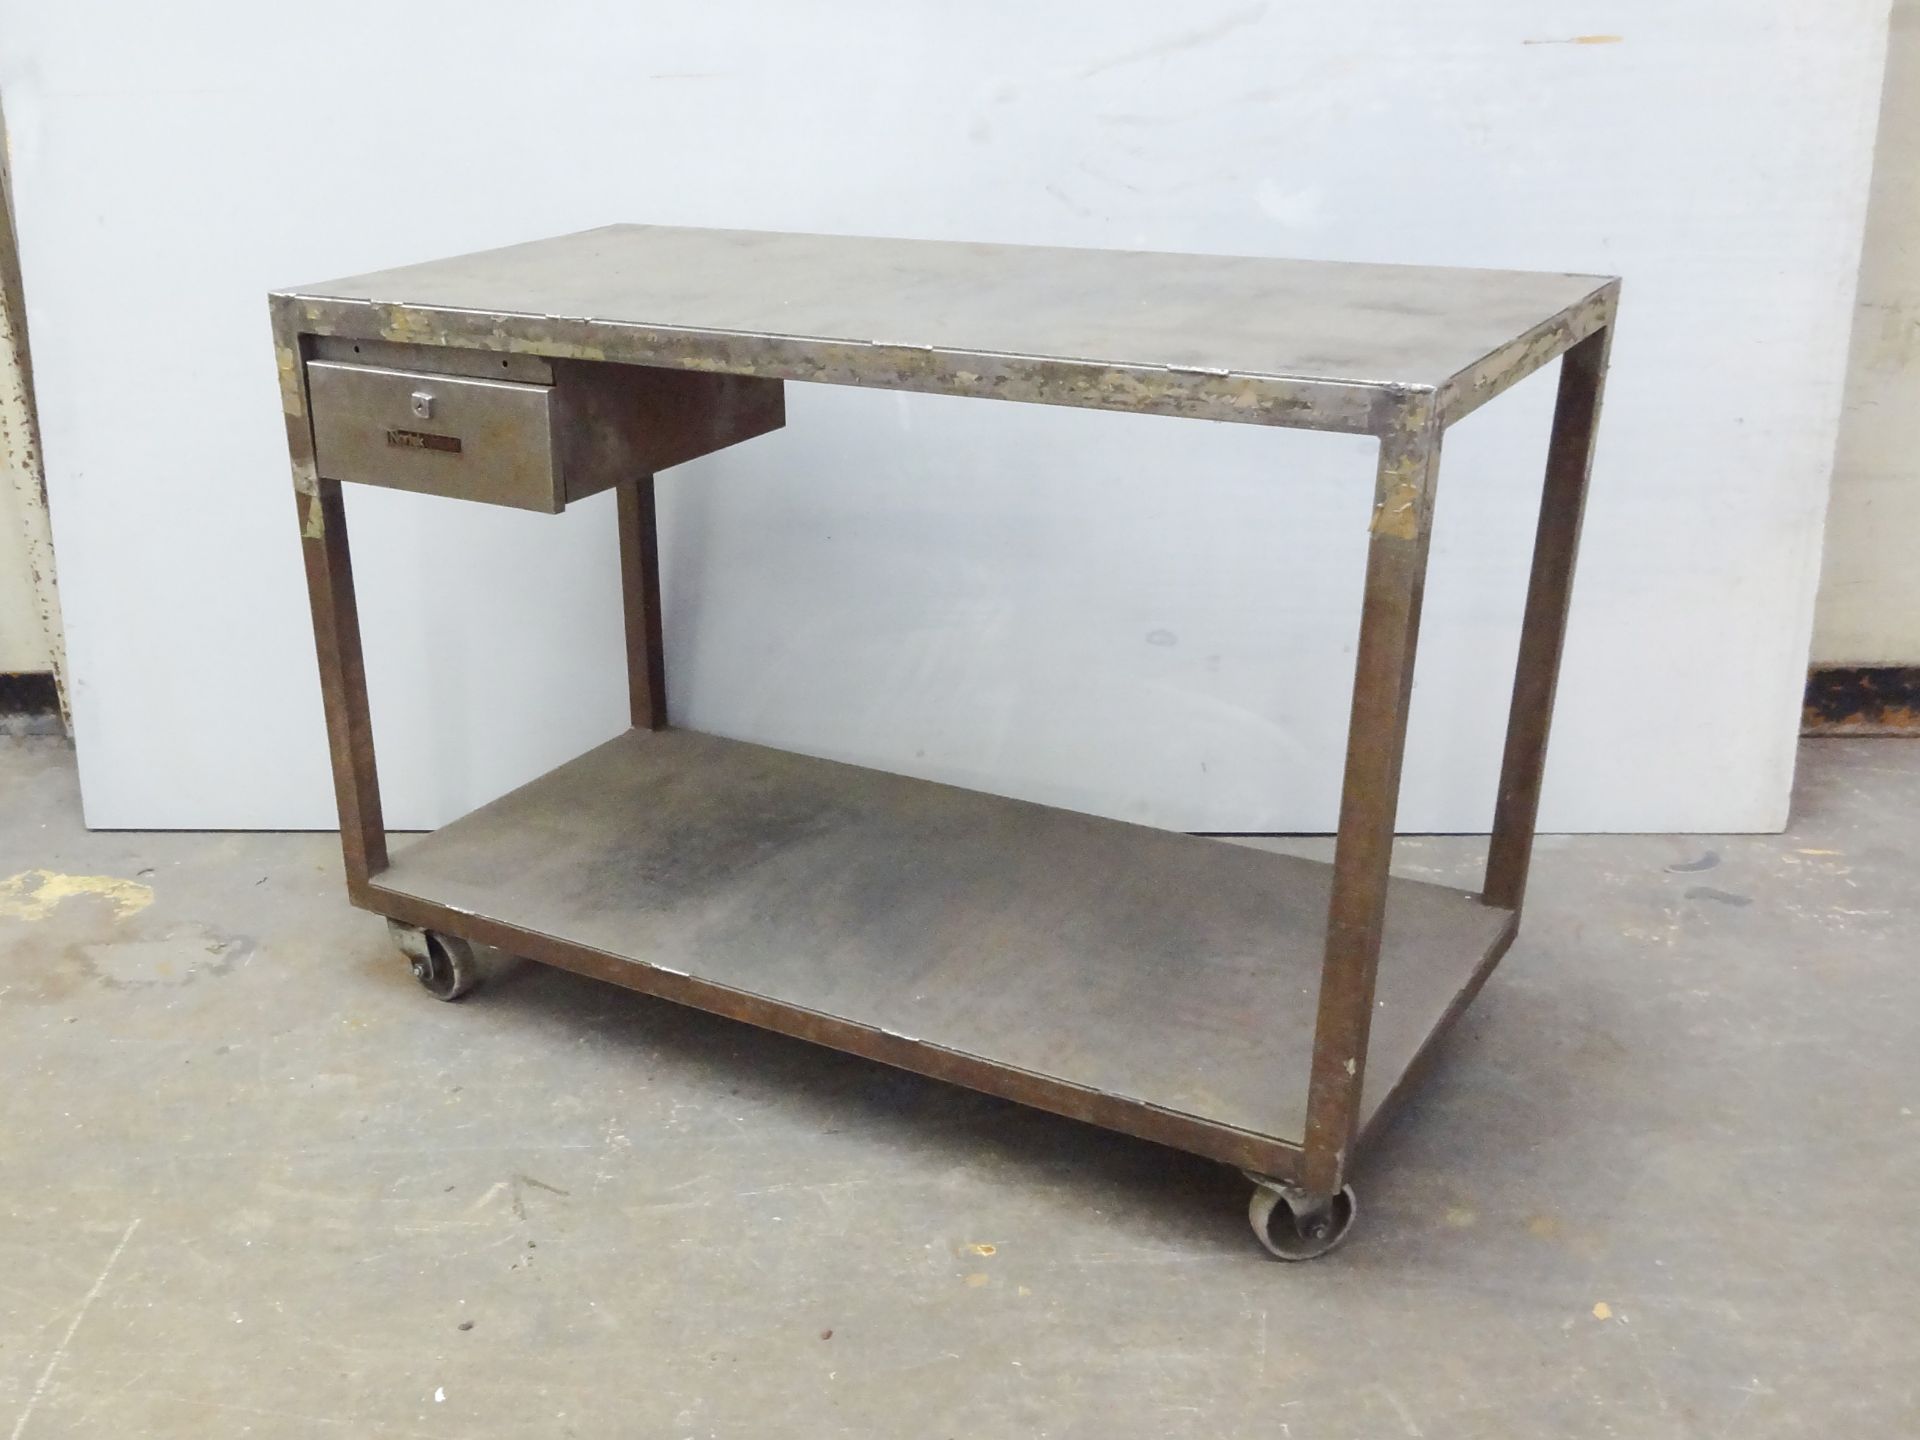 Two Heavy Duty Work Trolleys, with steel top and base shelf, approx. 1.25m x 625mm - Image 2 of 2